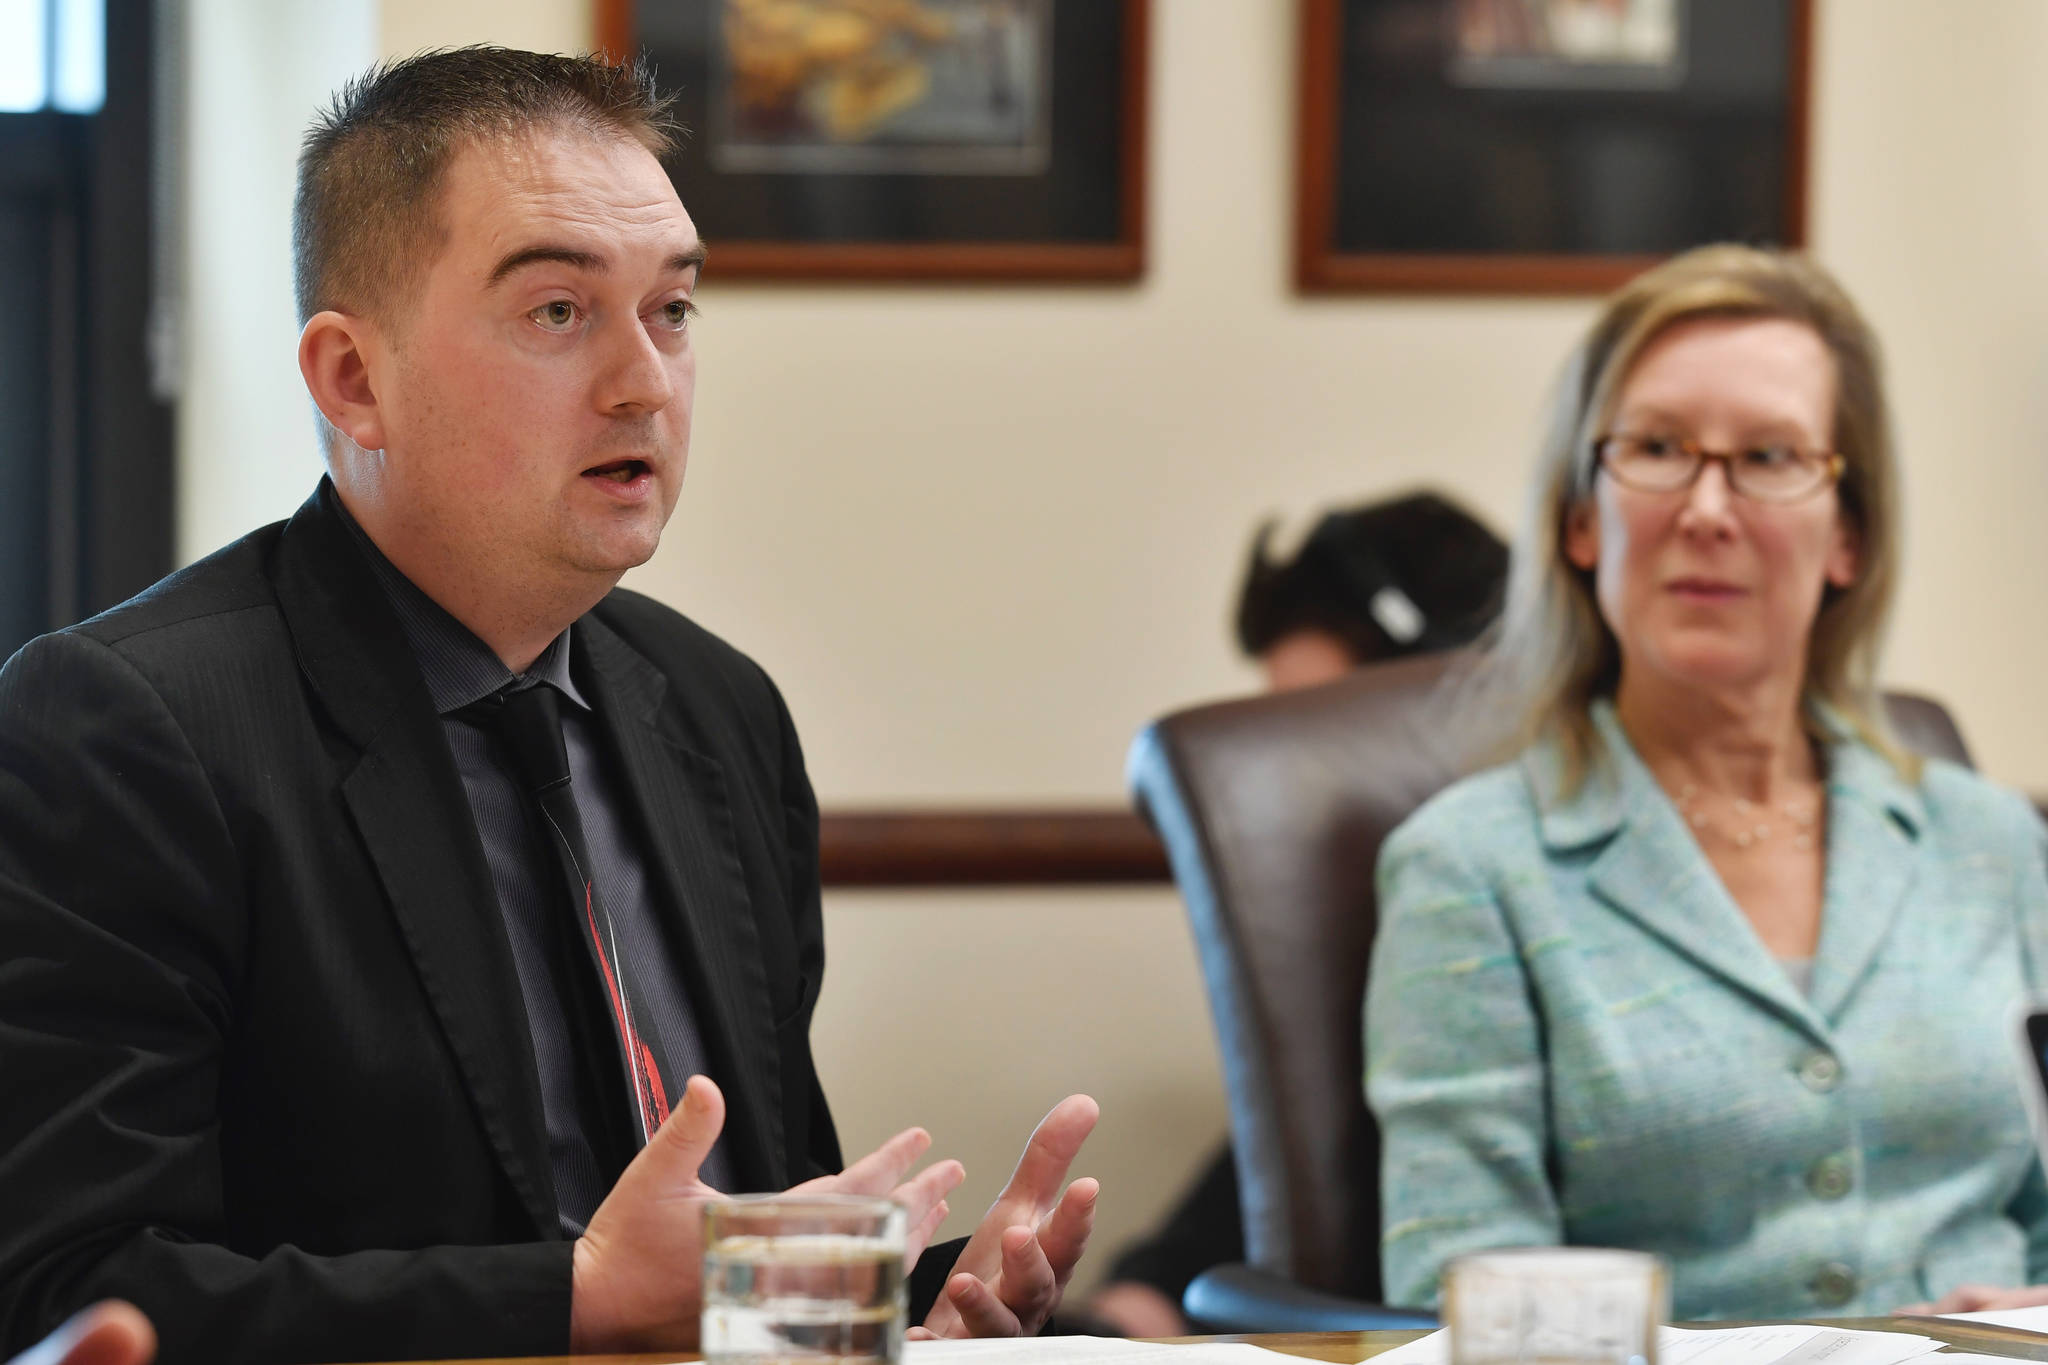 Edward King, Chief Economist for the Department of Revenue, and Donna Arduin, Director of the Office of Management and Budget, speak to members of the media at the Capitol on Wednesday, March 6, 2019. (Michael Penn | Juneau Empire)